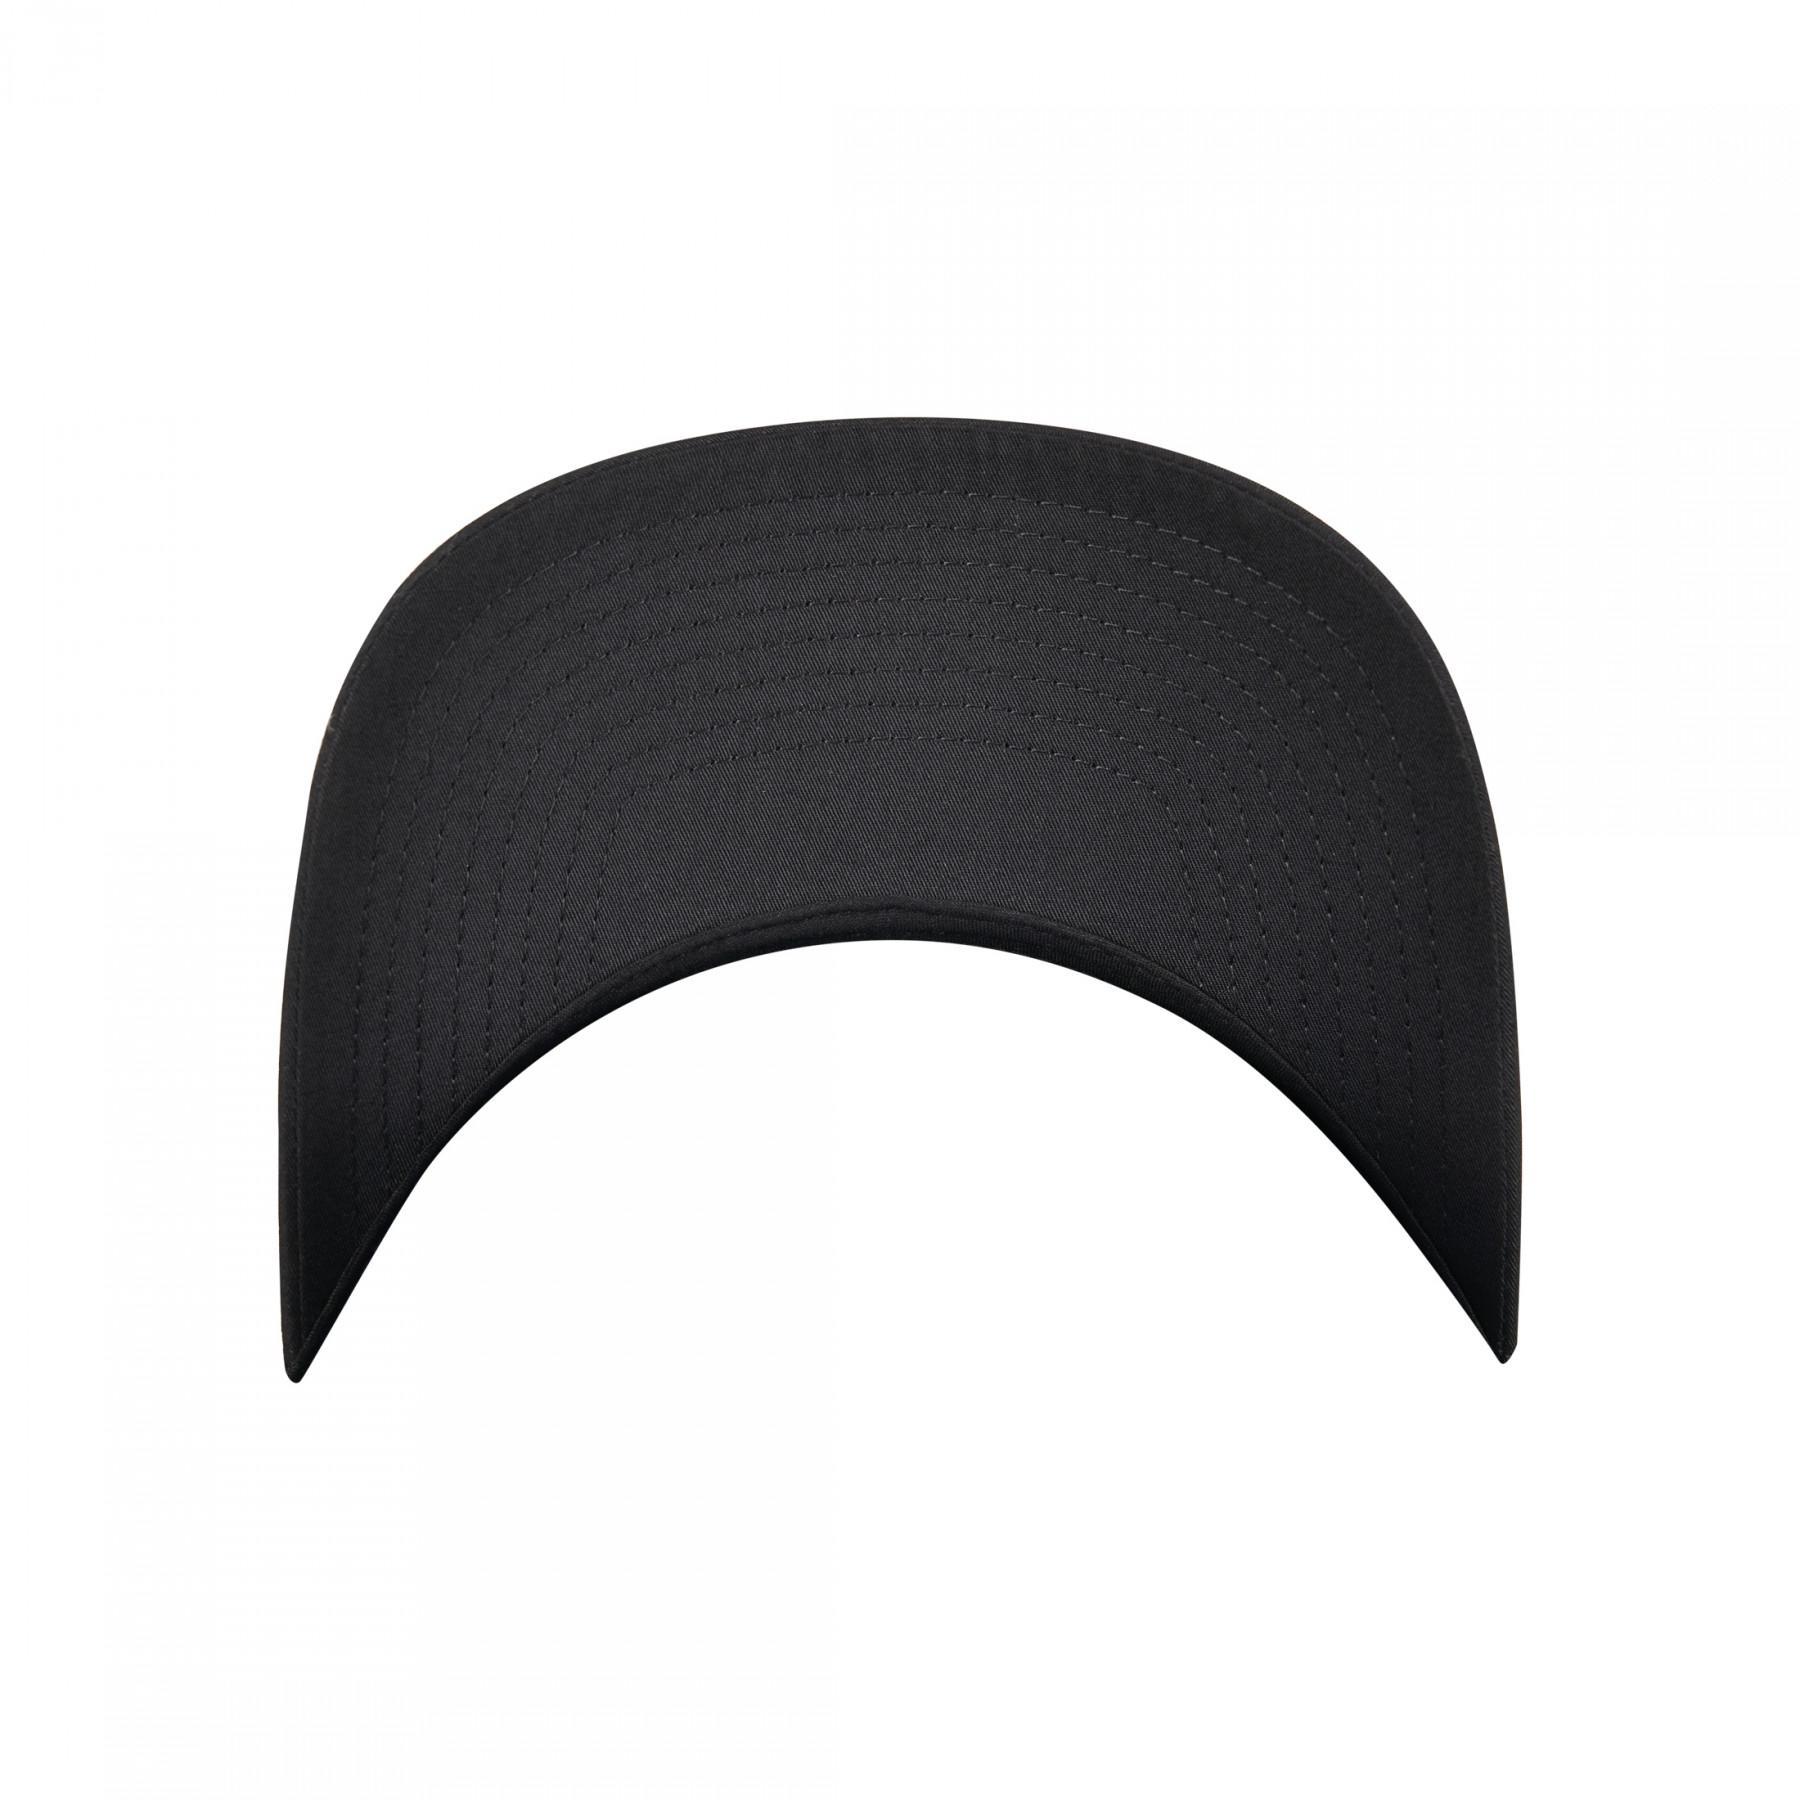 Cap Flexfit recycled poly twill with mesh